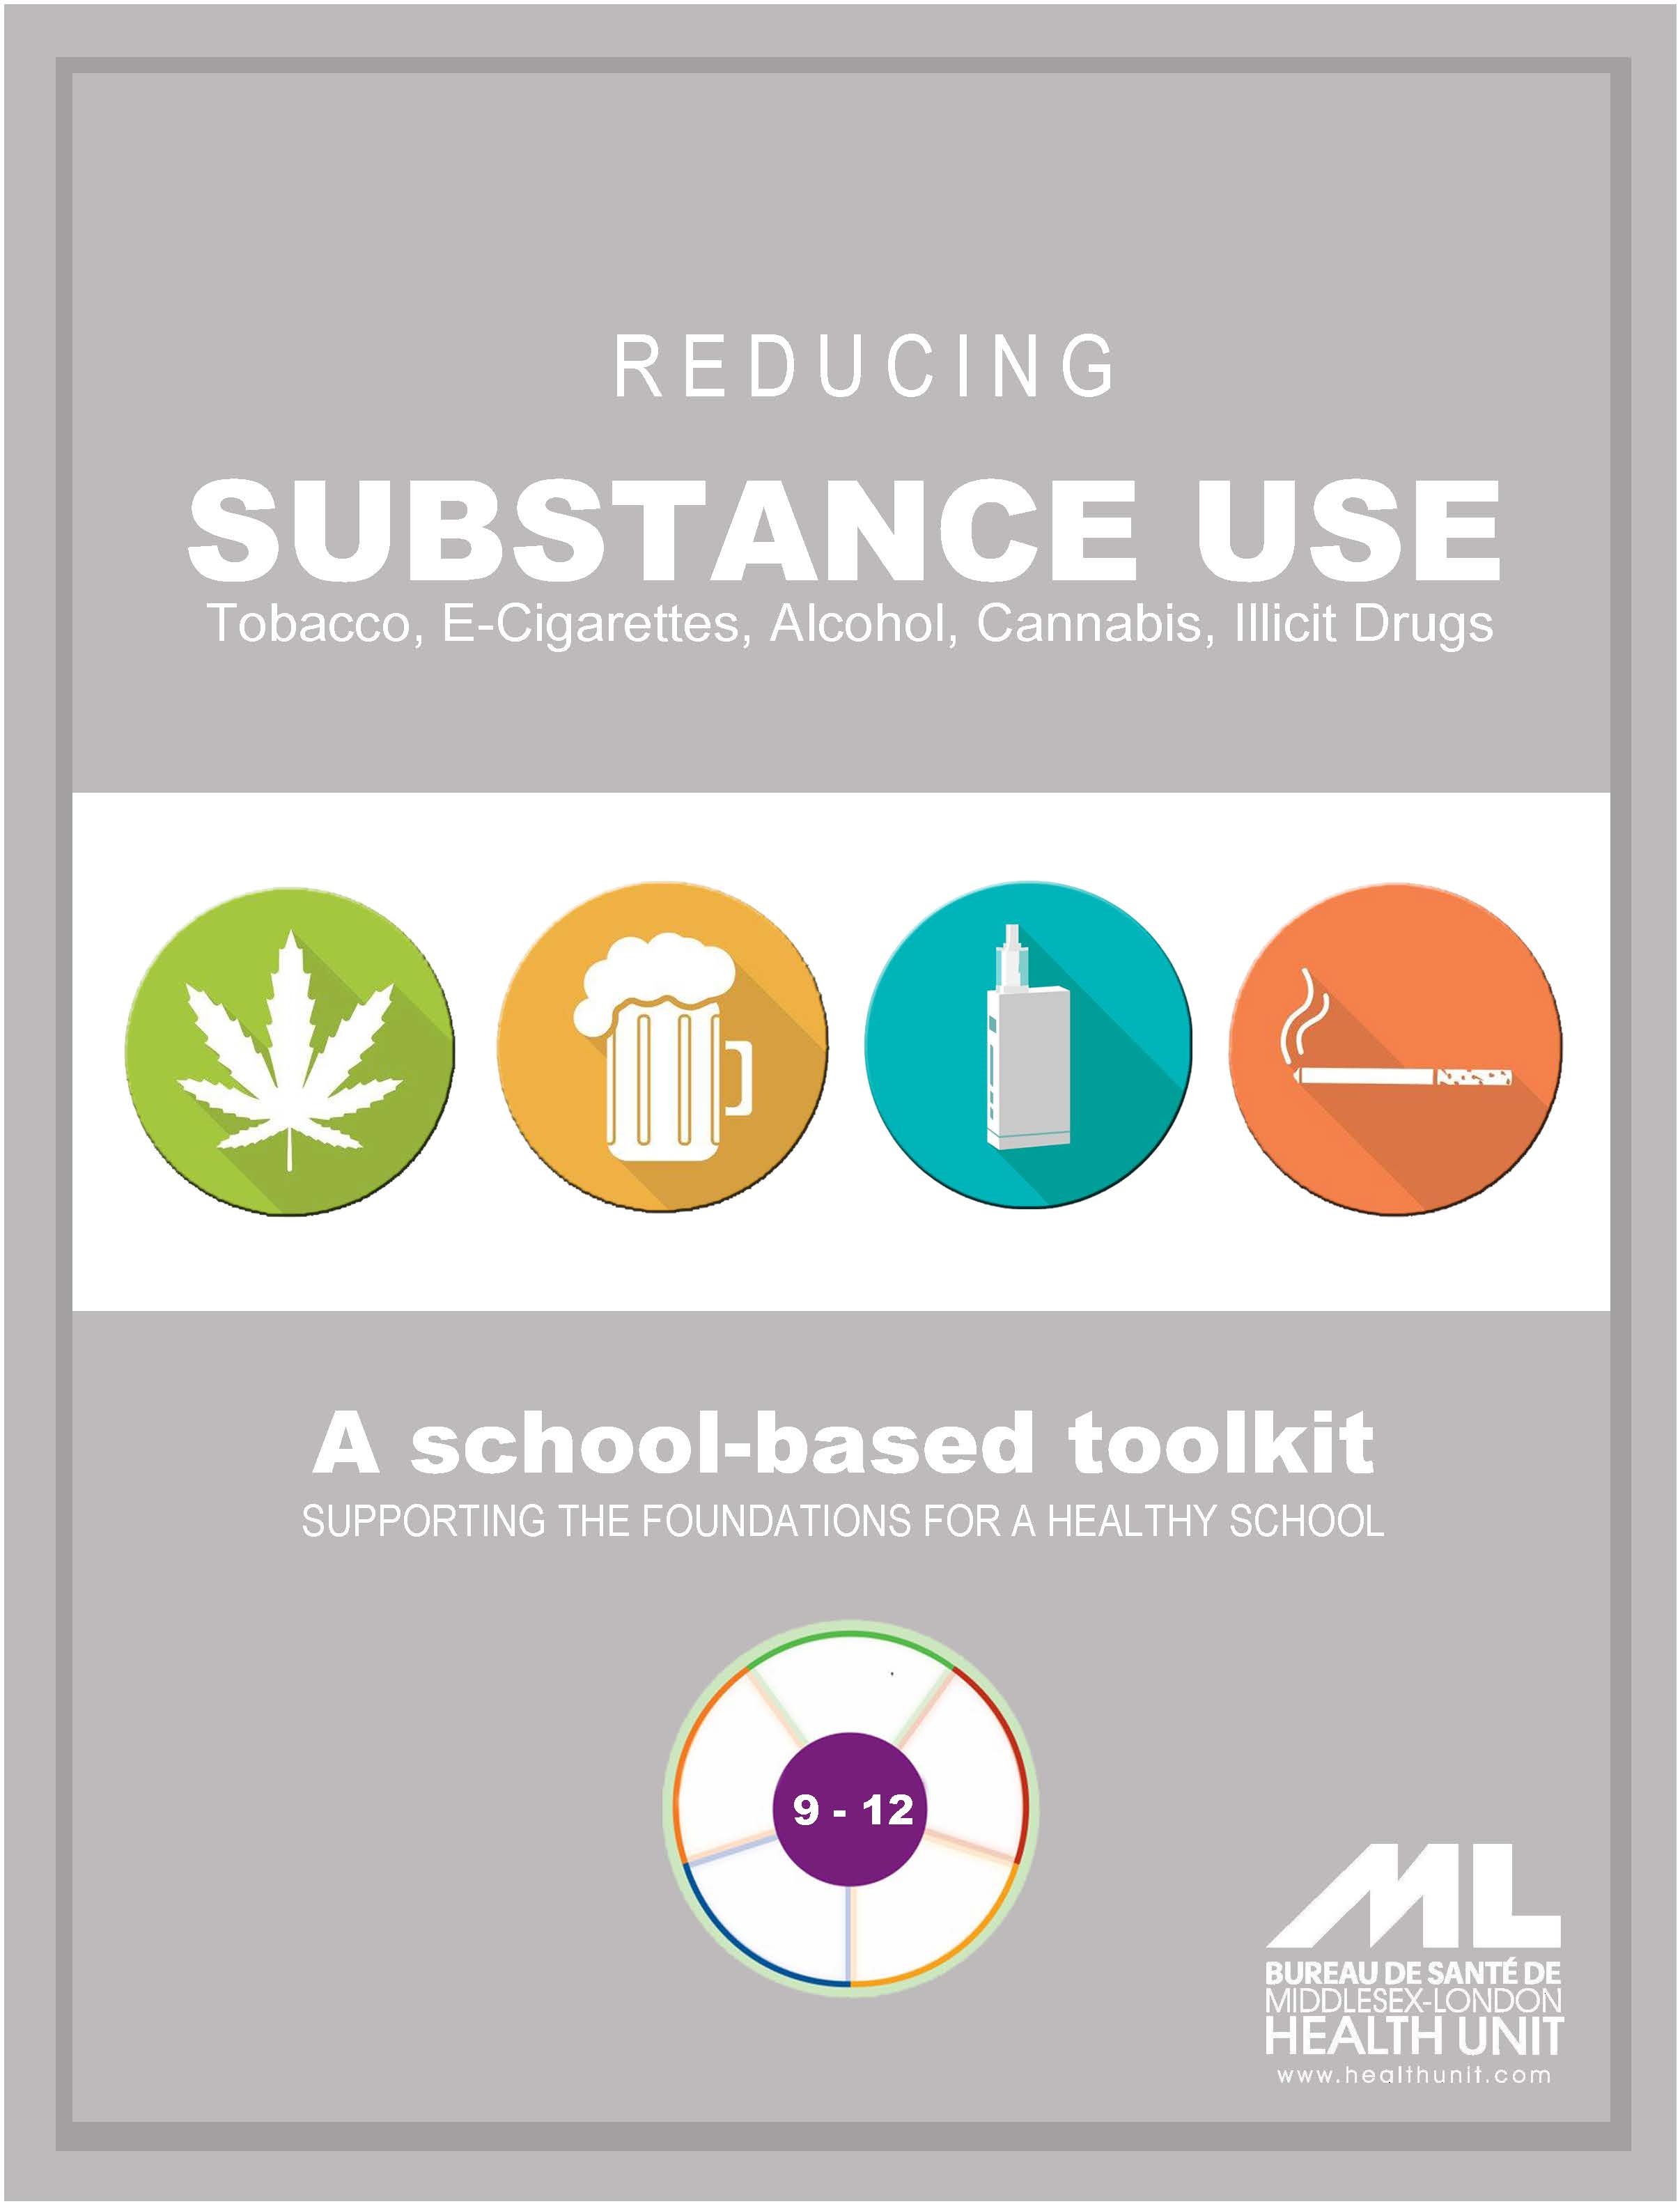 Secondary School Toolkit: Reducing Substance Use